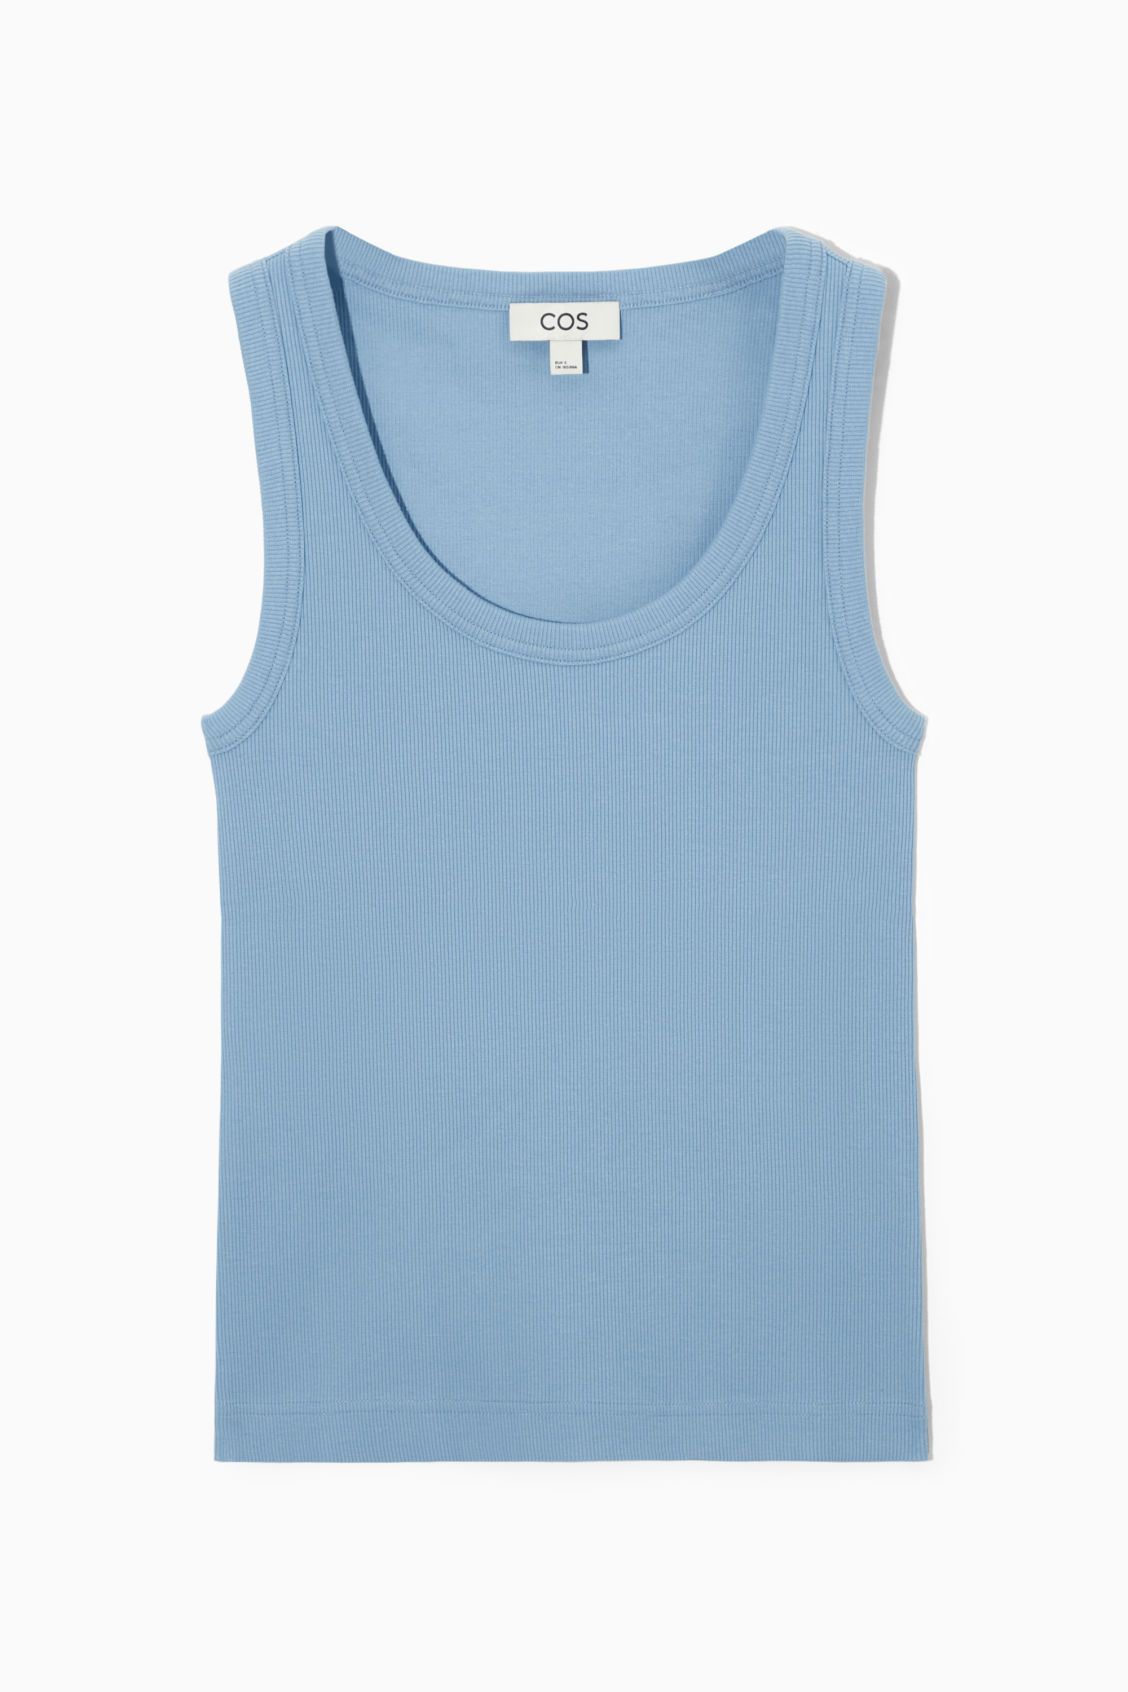 SCOOP-NECK RIBBED TANK TOP | COS (US)